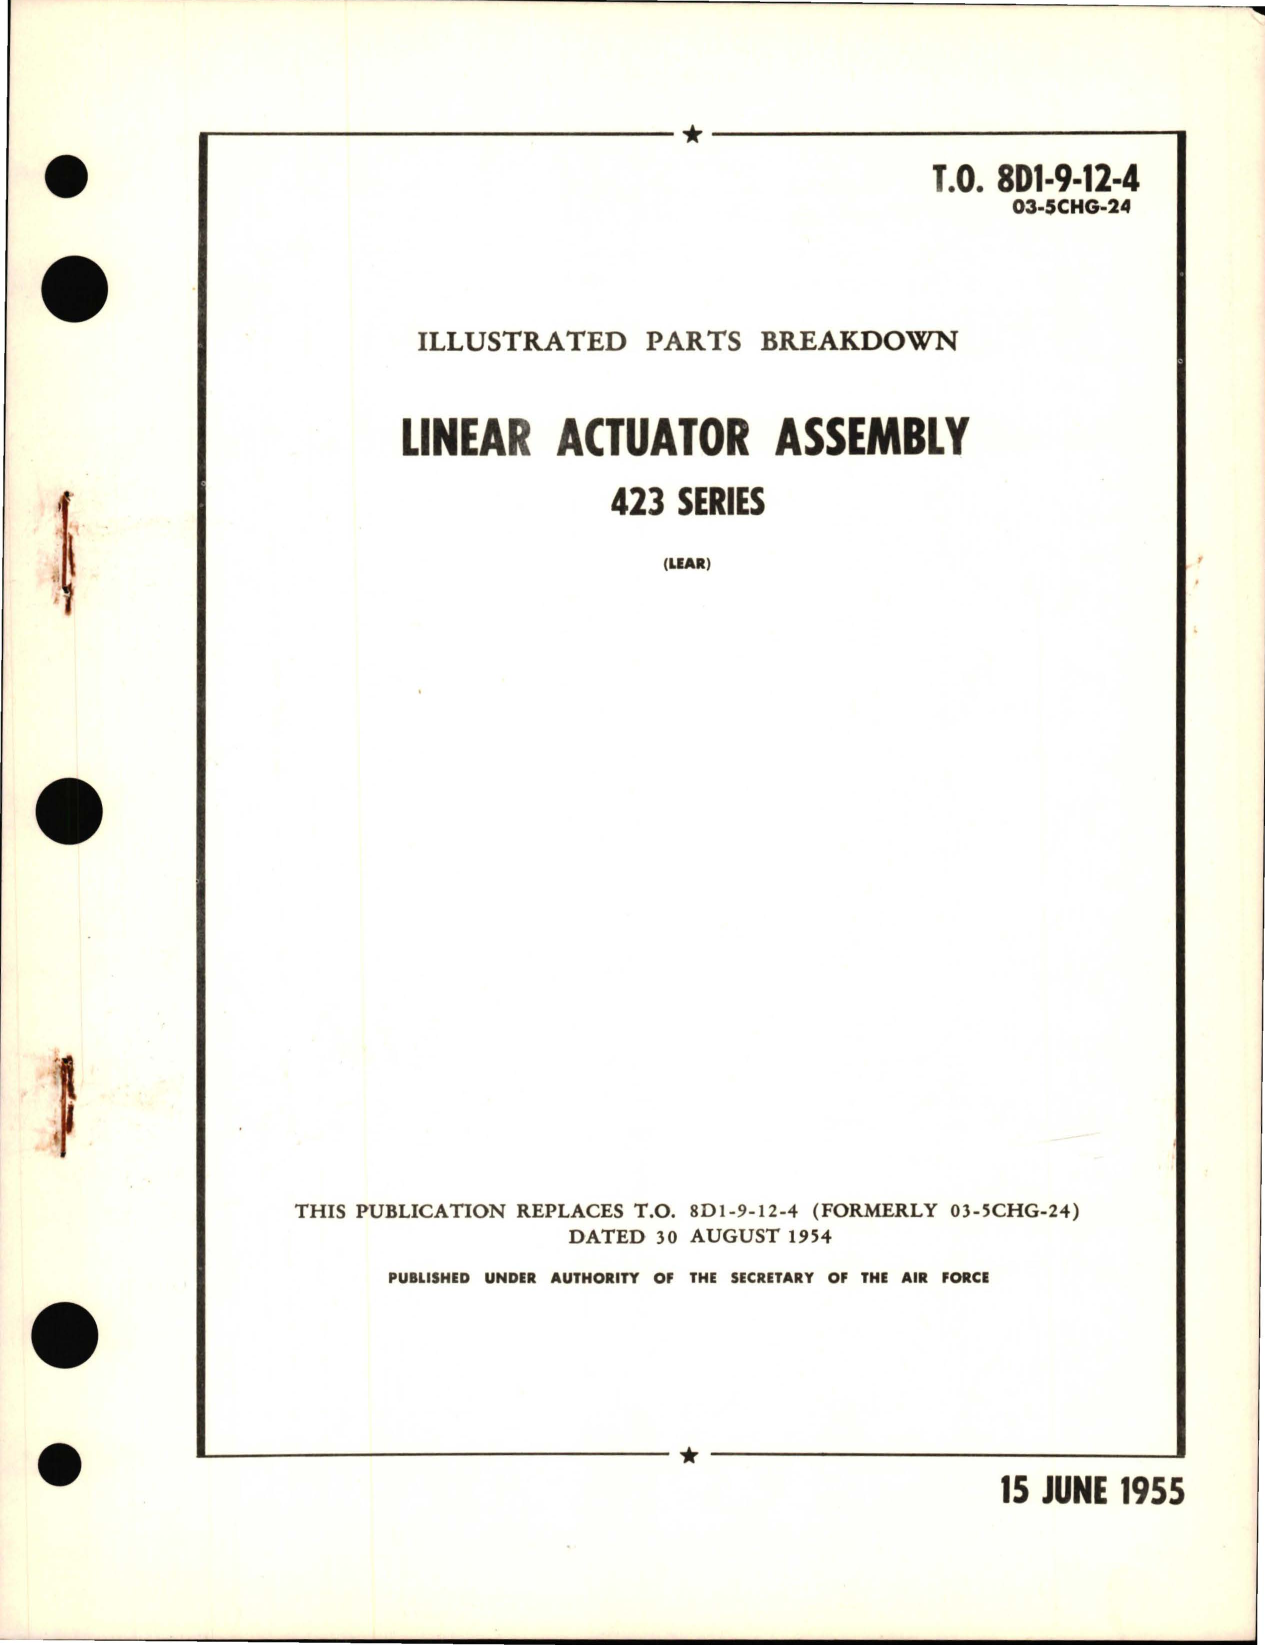 Sample page 1 from AirCorps Library document: Illustrated Parts Breakdown for Linear Actuator Assembly 423 Series